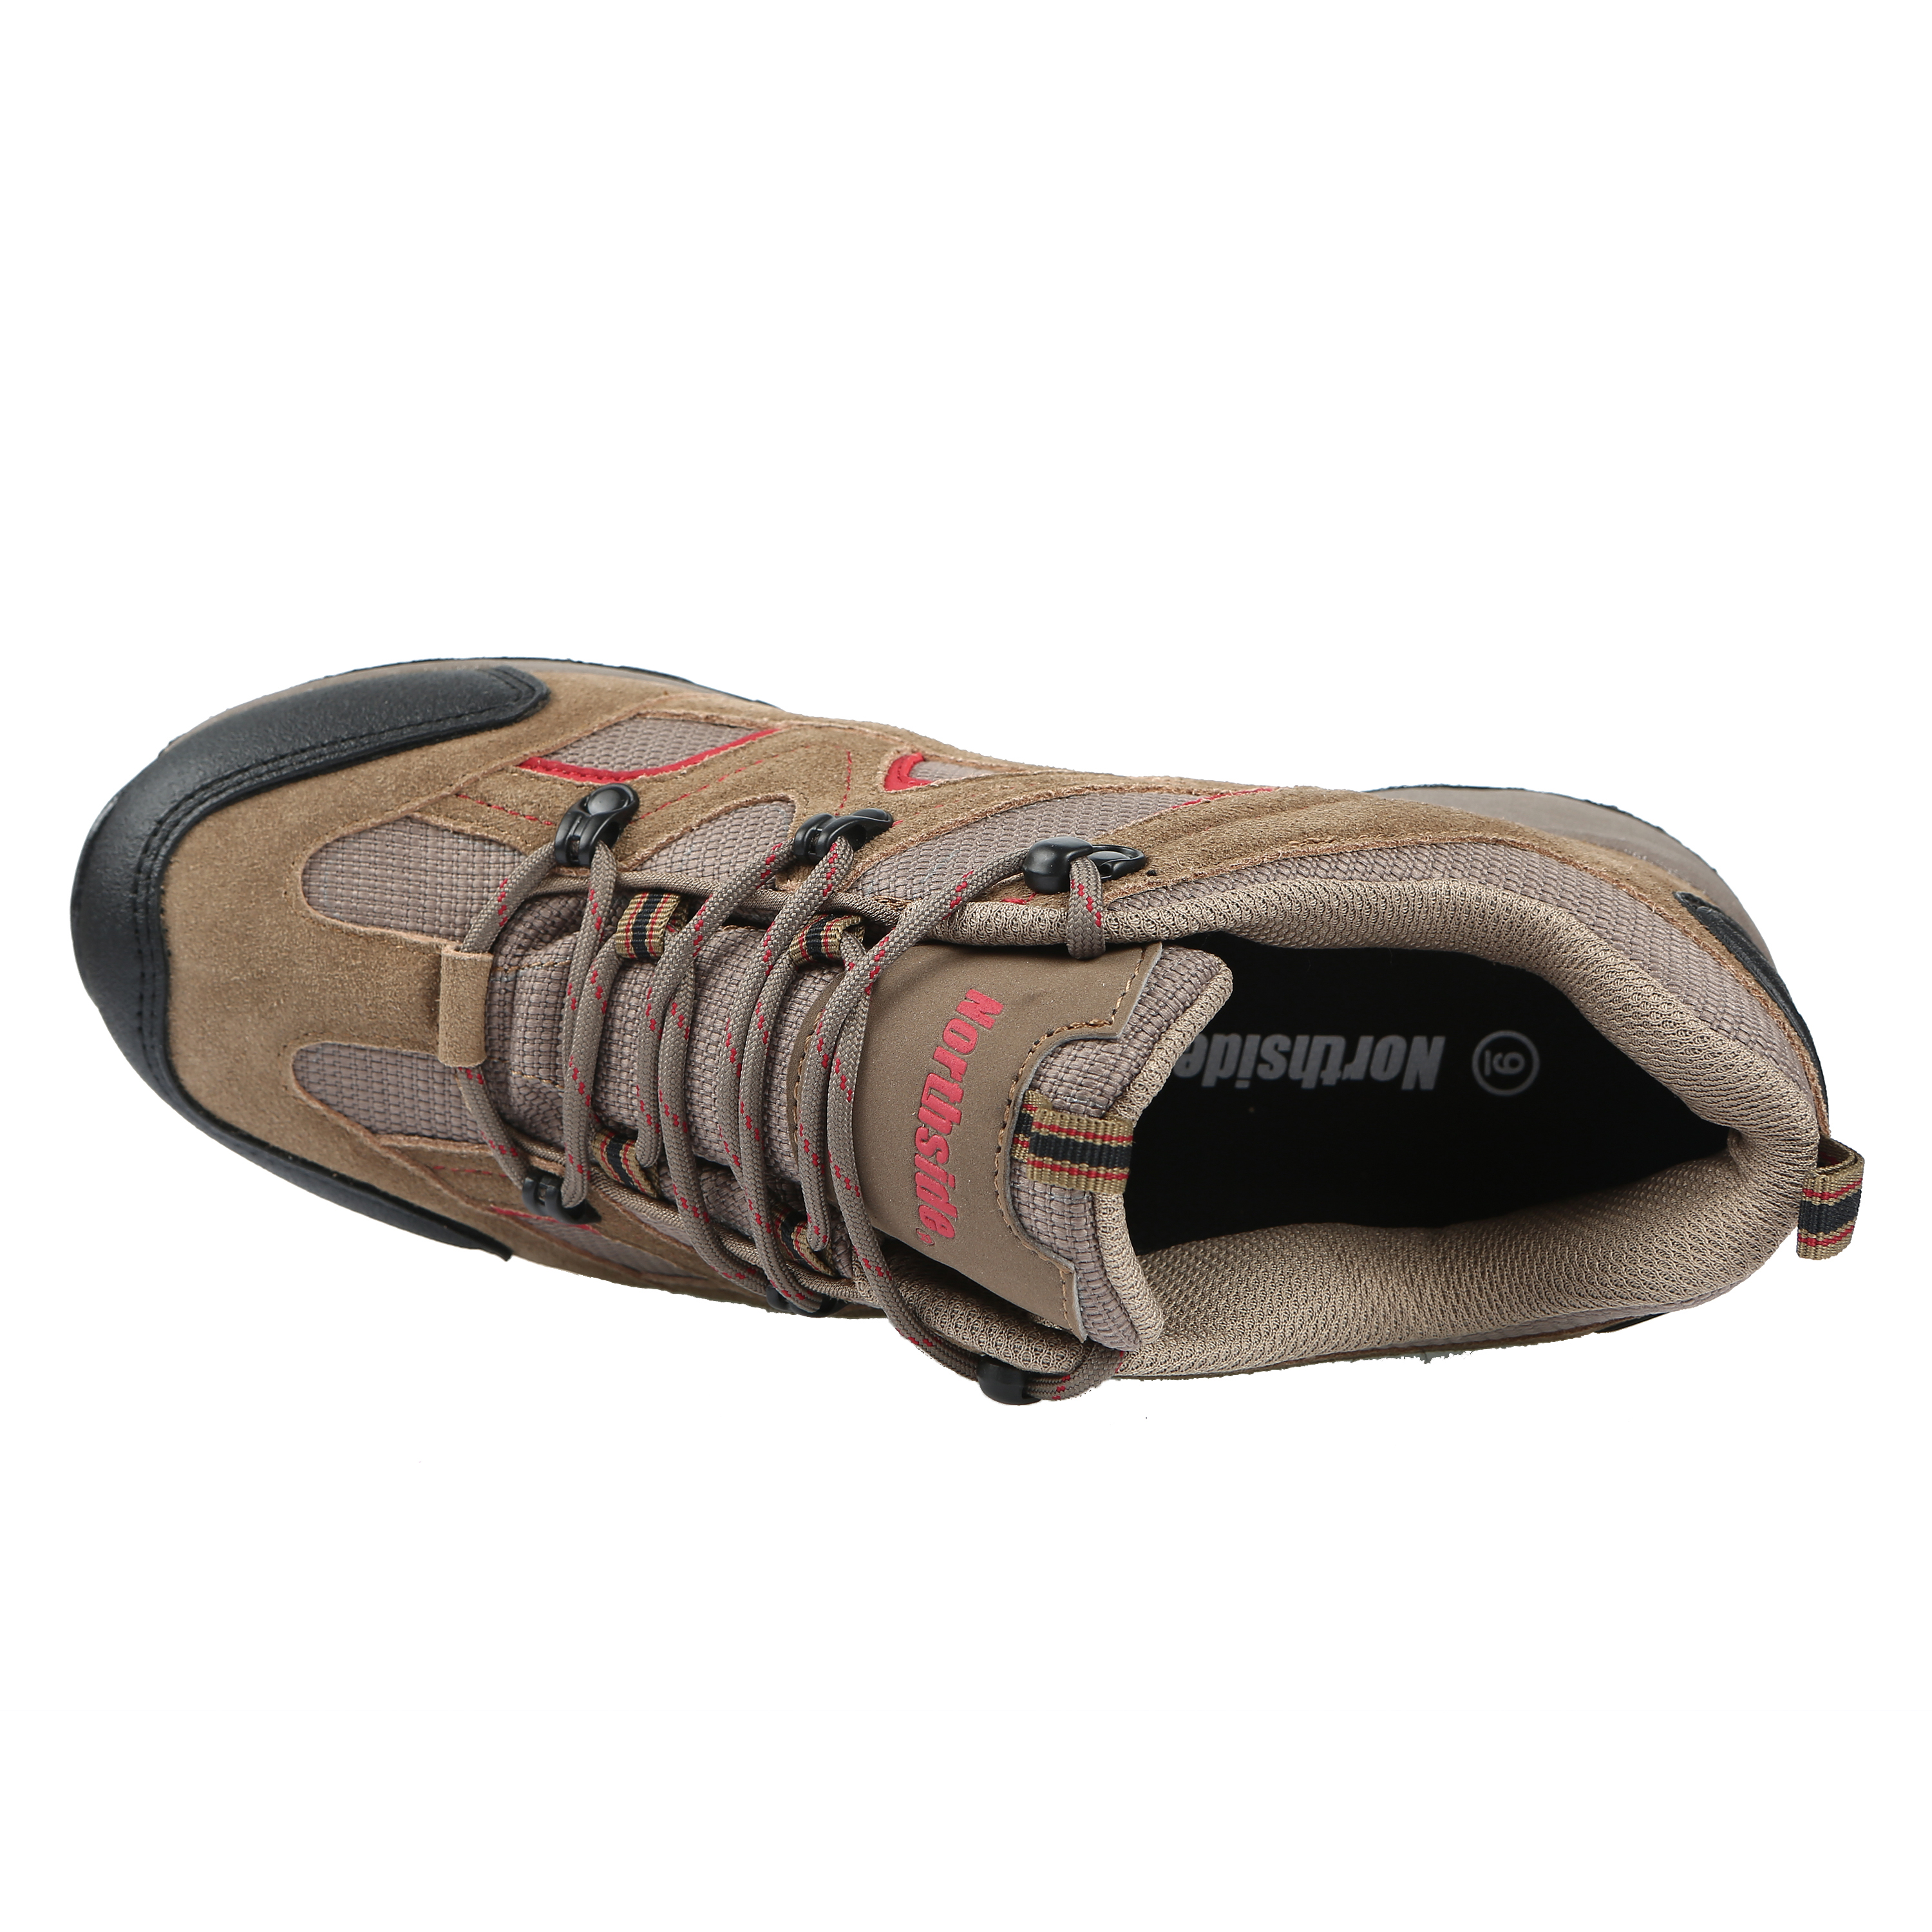 Northside Men's Snohomish Leather Water Resistant Hiking Shoe (Wide Available) - image 3 of 5